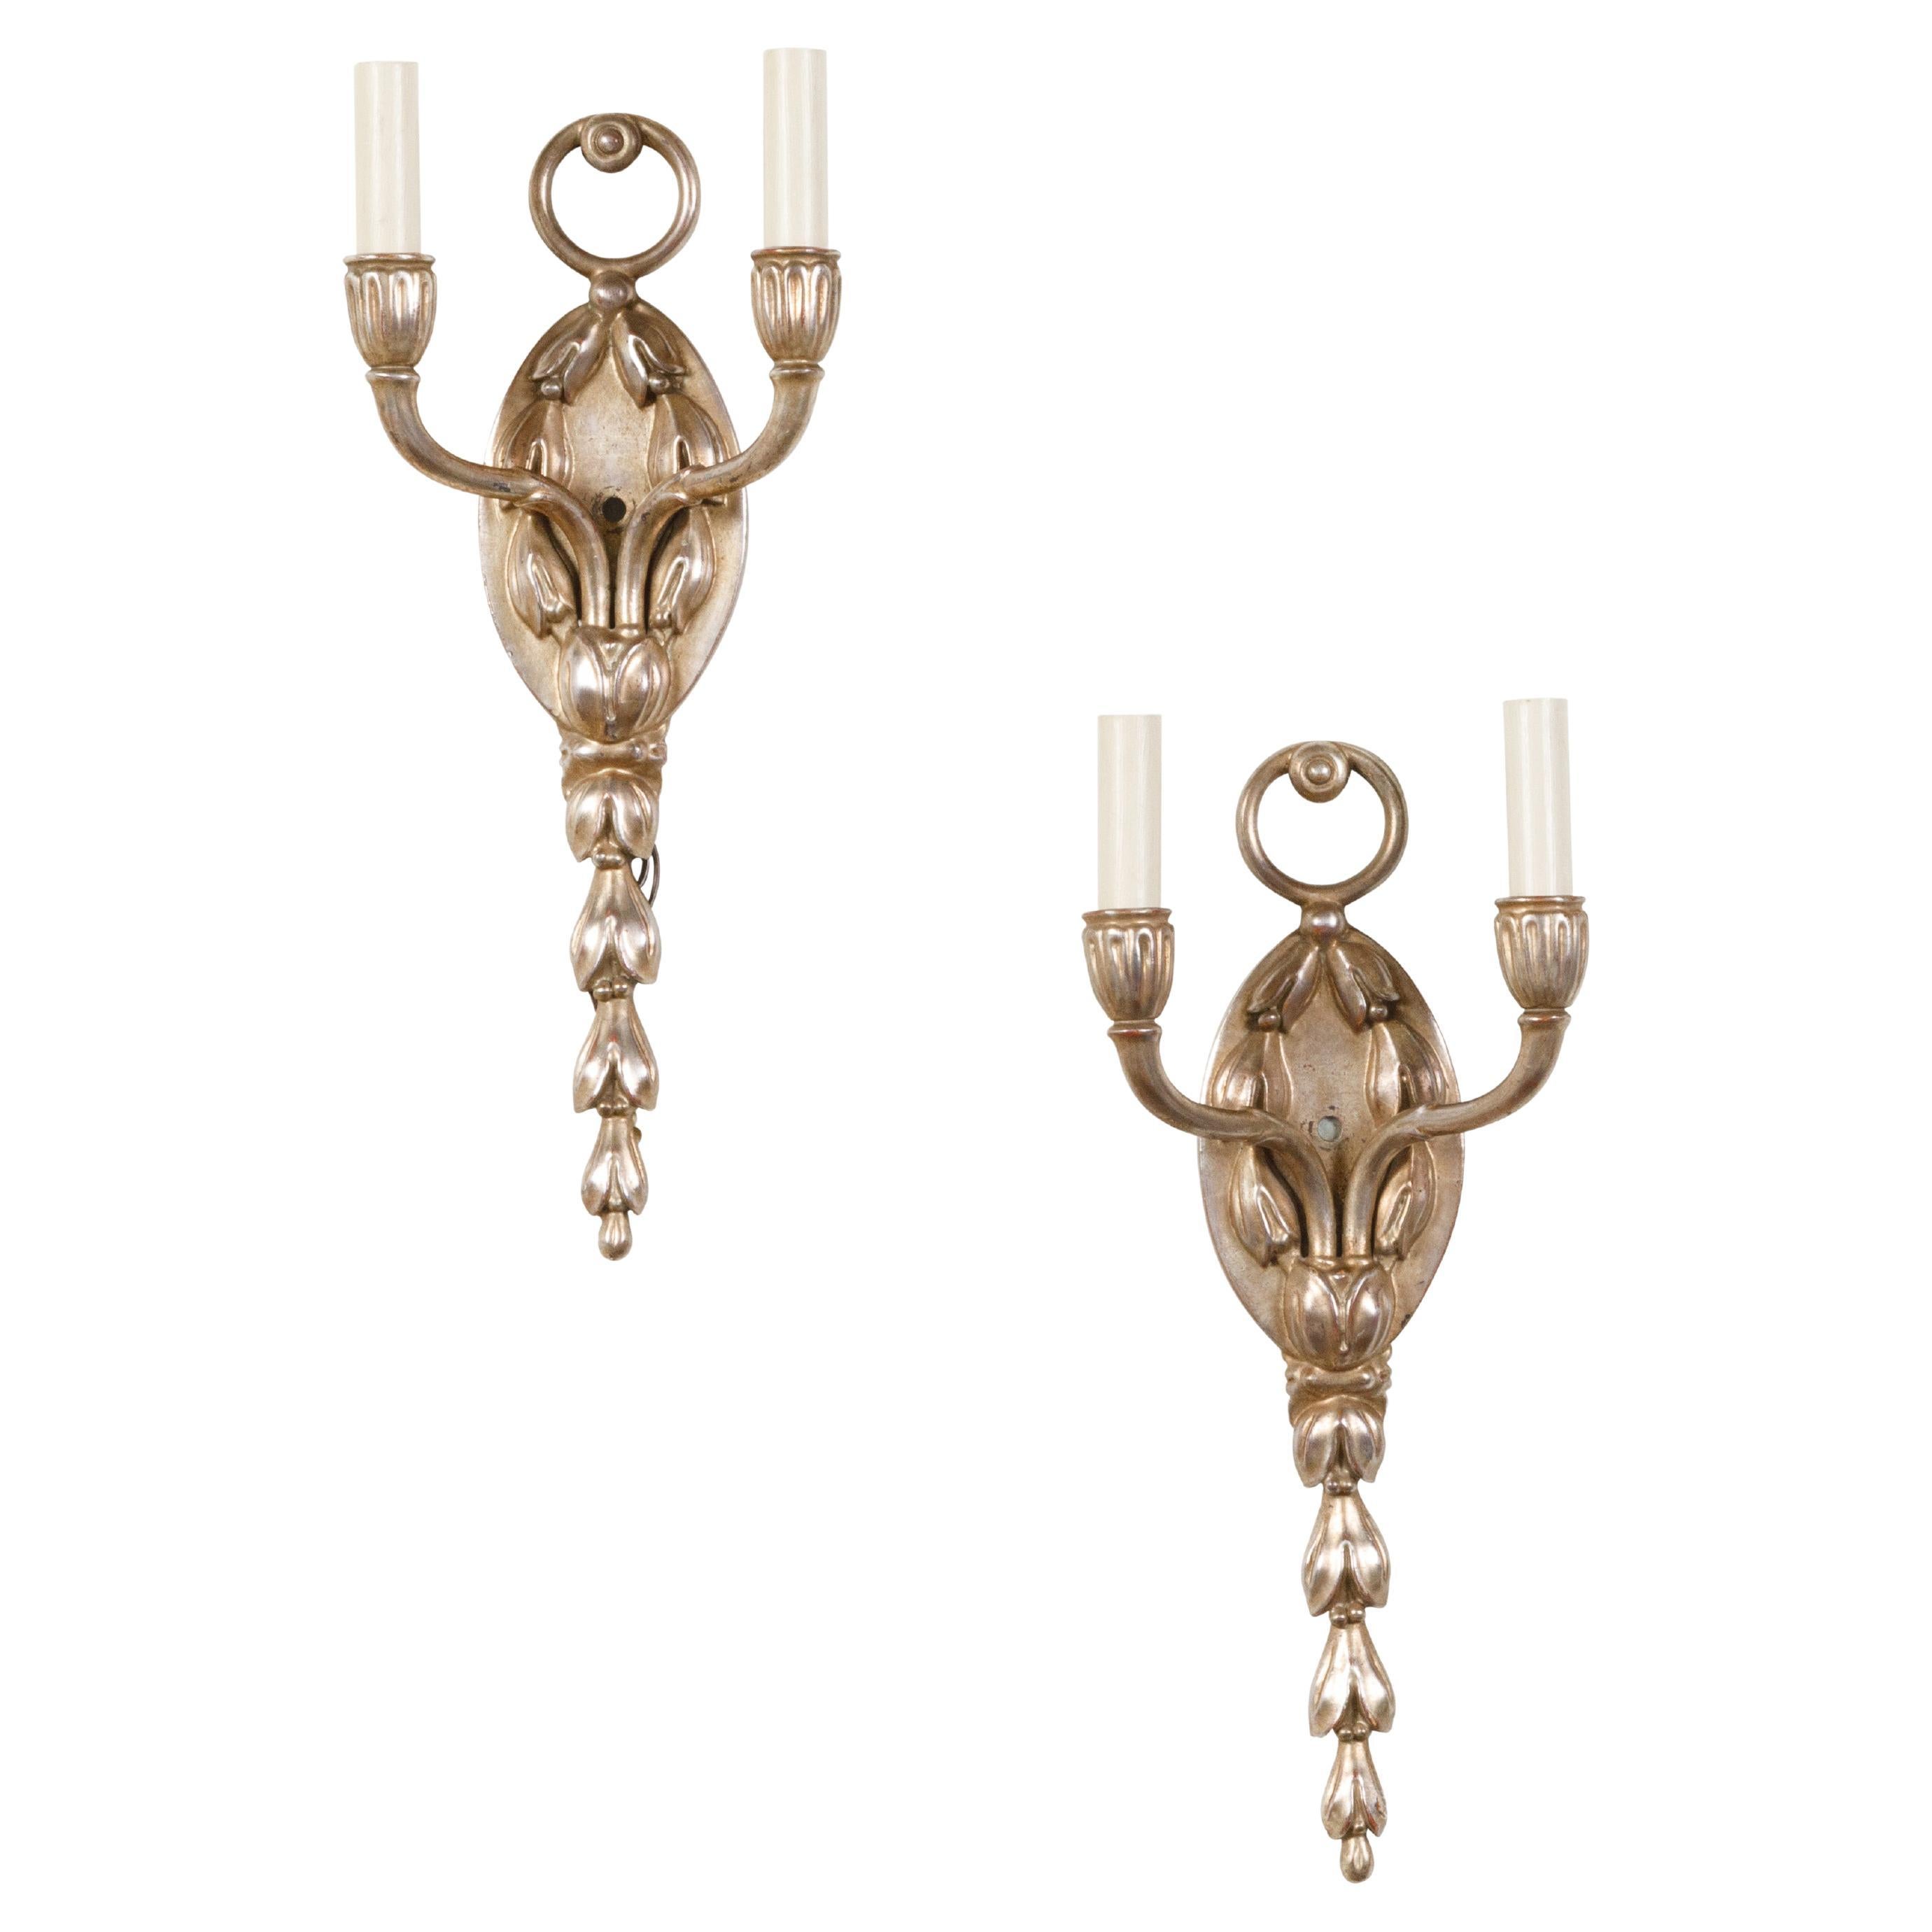 Pair of English Midcentury Silver Plated Two-Light Wall Sconces with Foliage